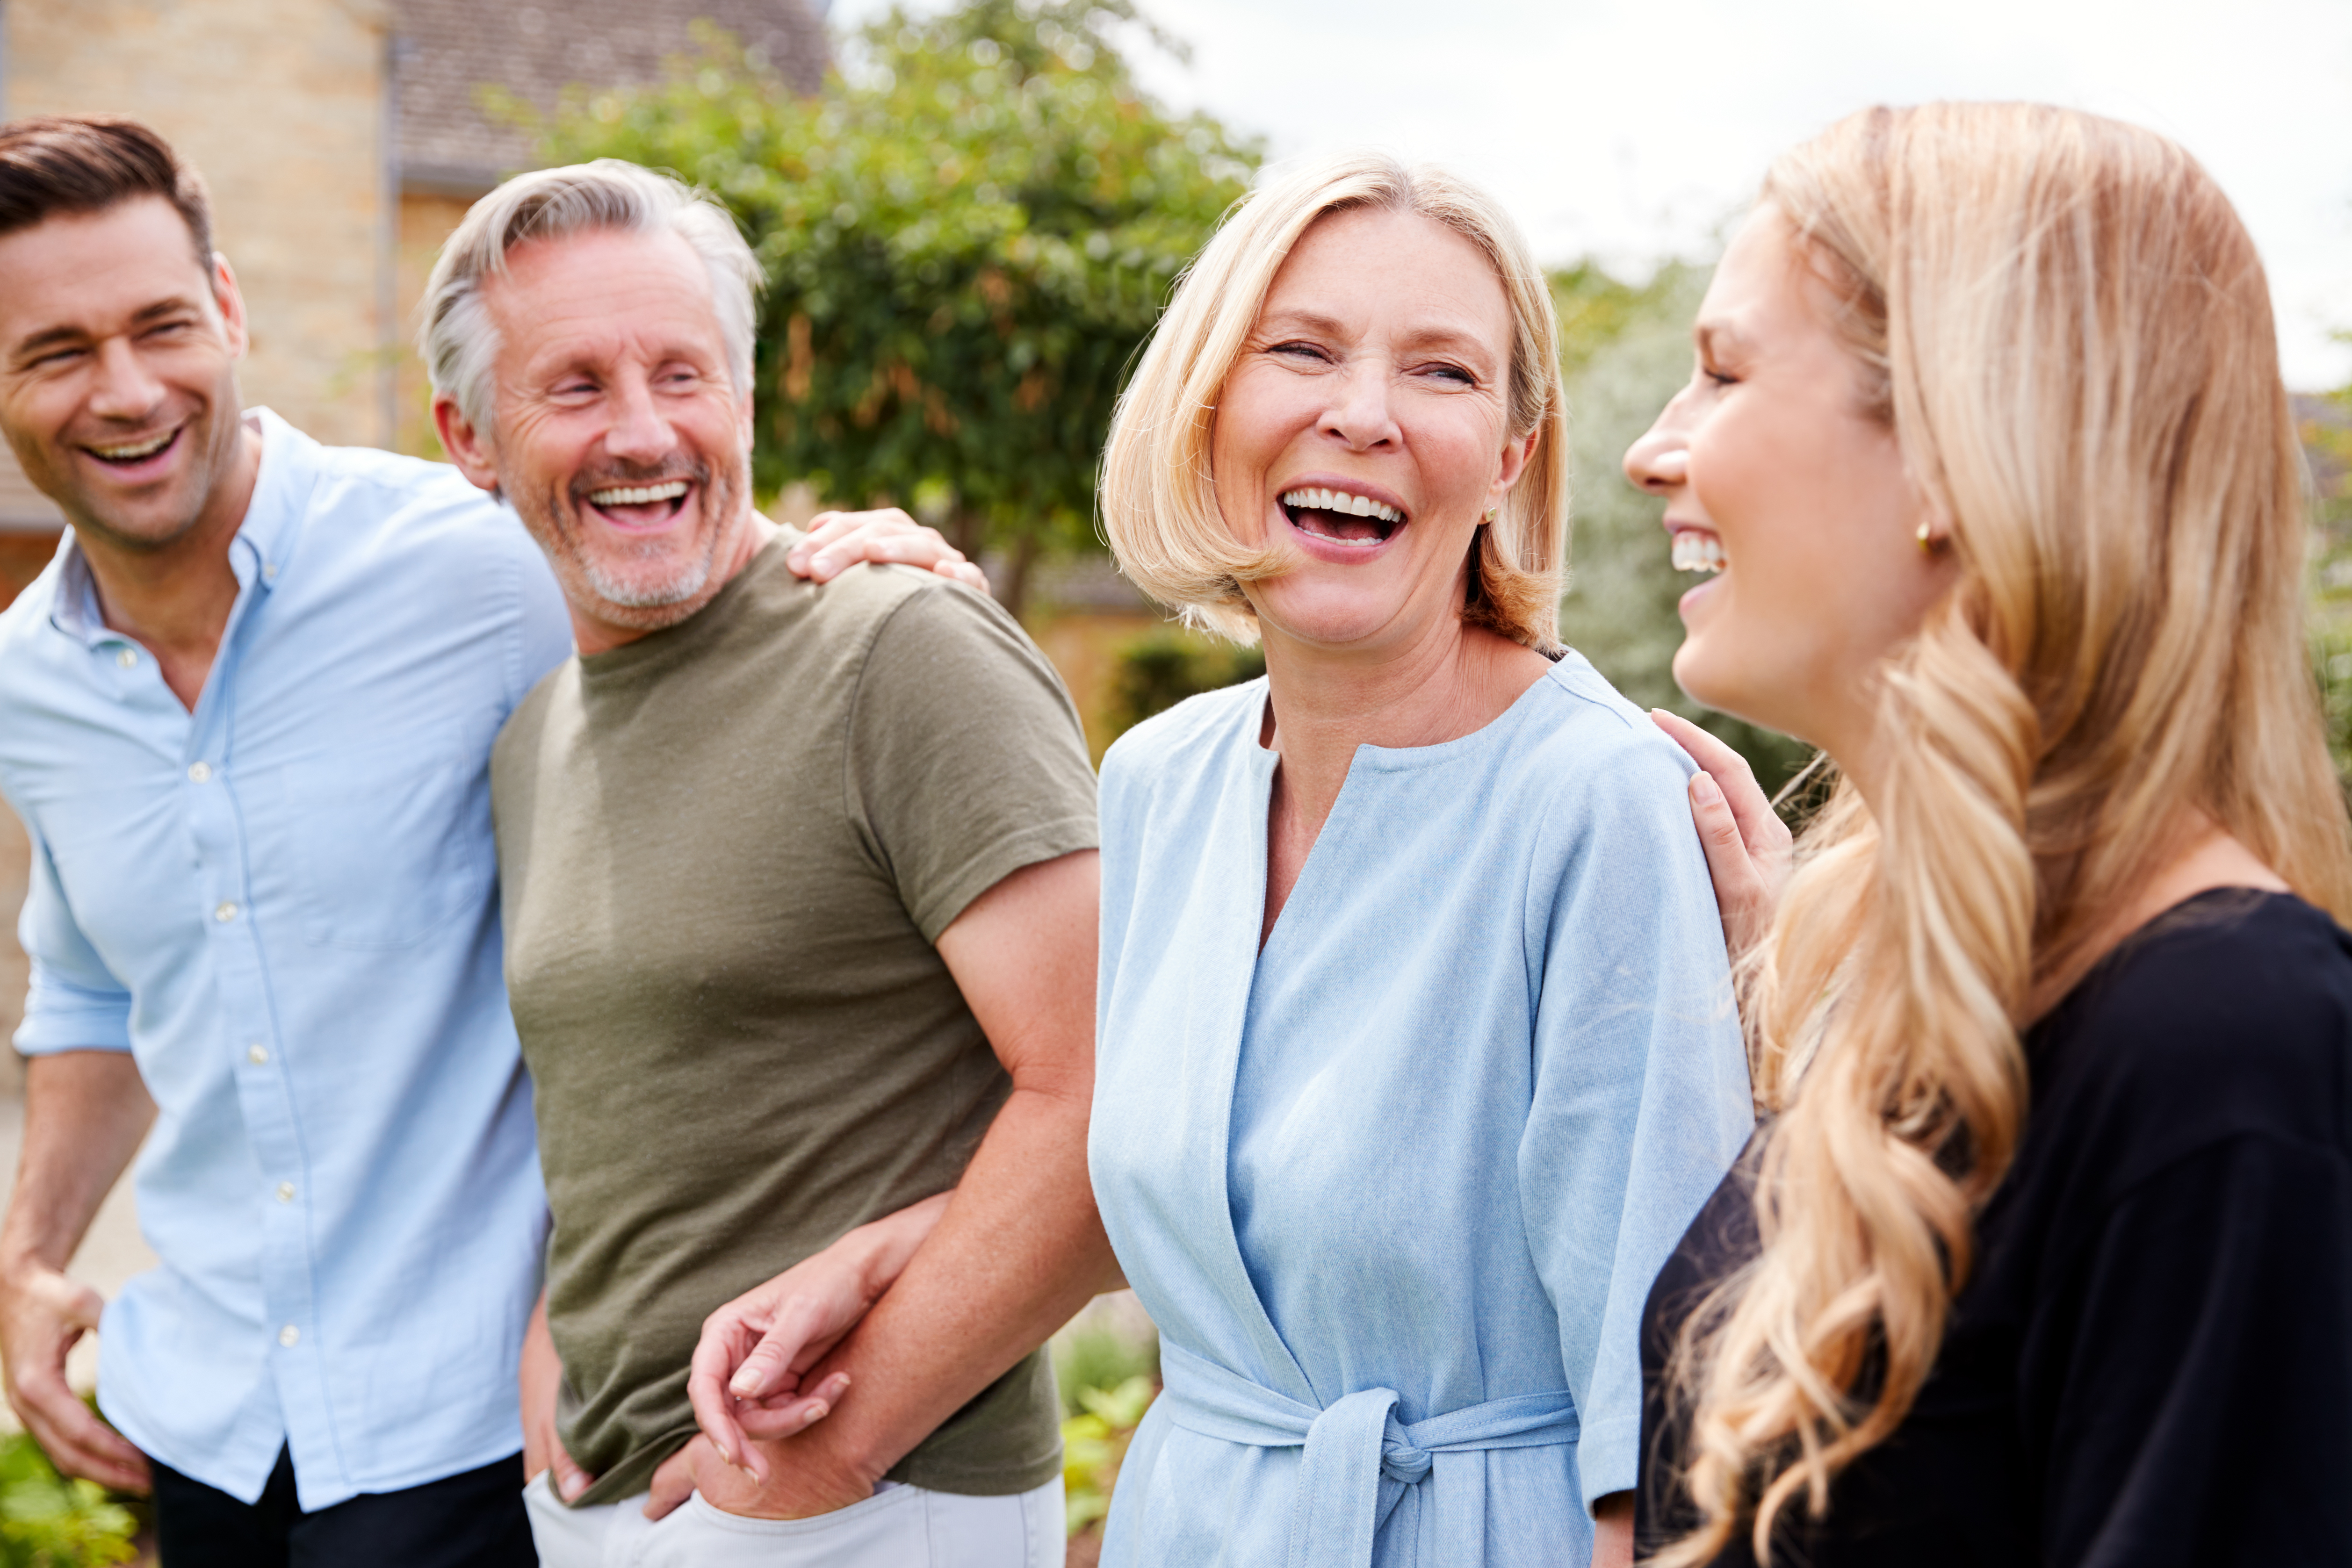 A family photographed smiling | Source: Shutterstock